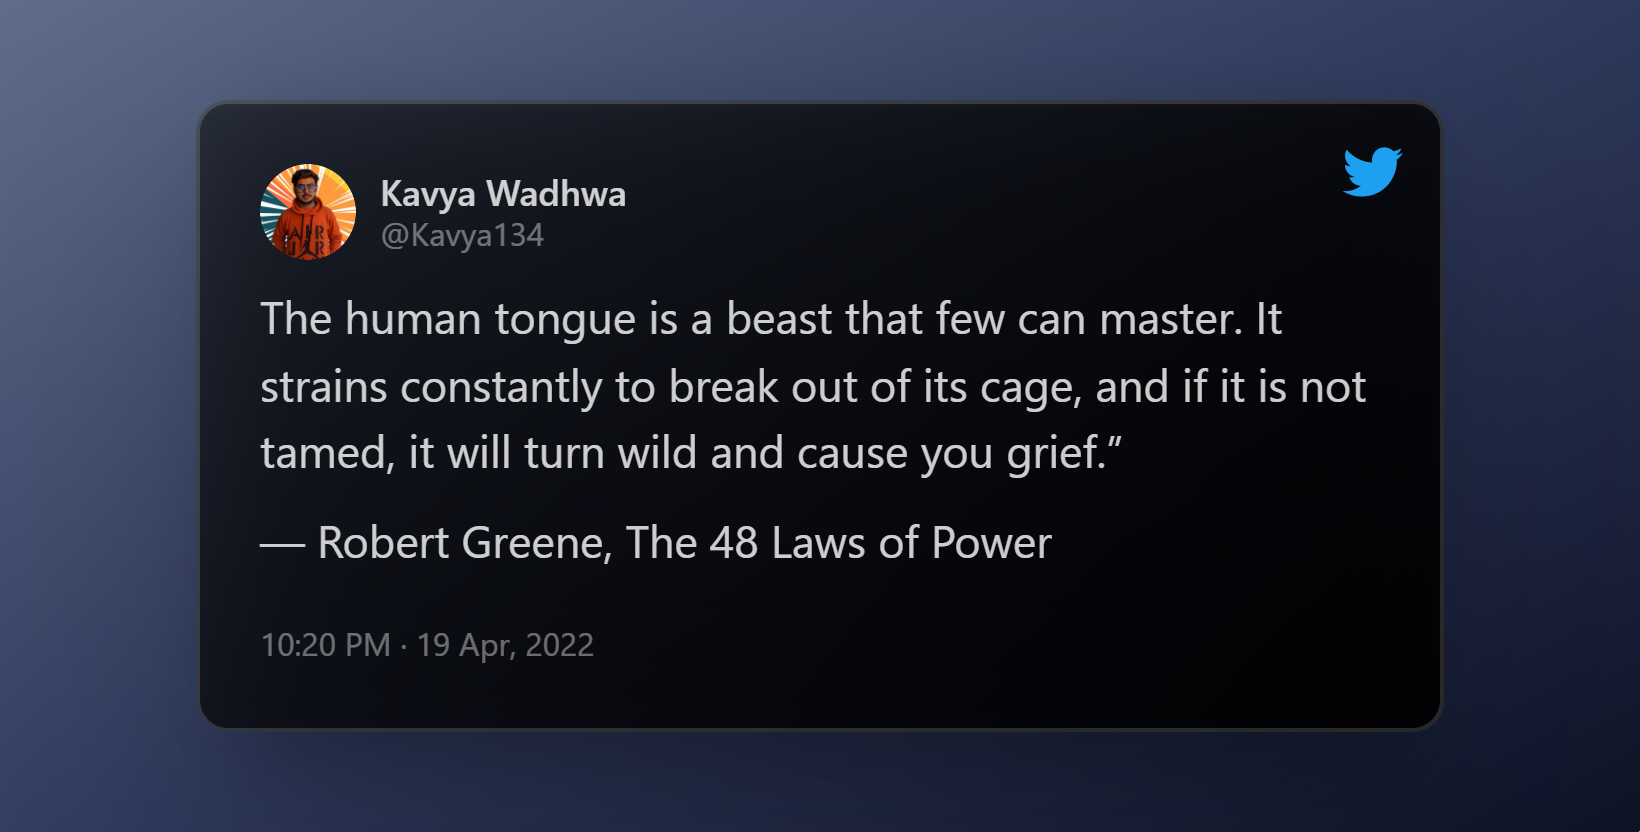 The human tongue is a beast that few can master !